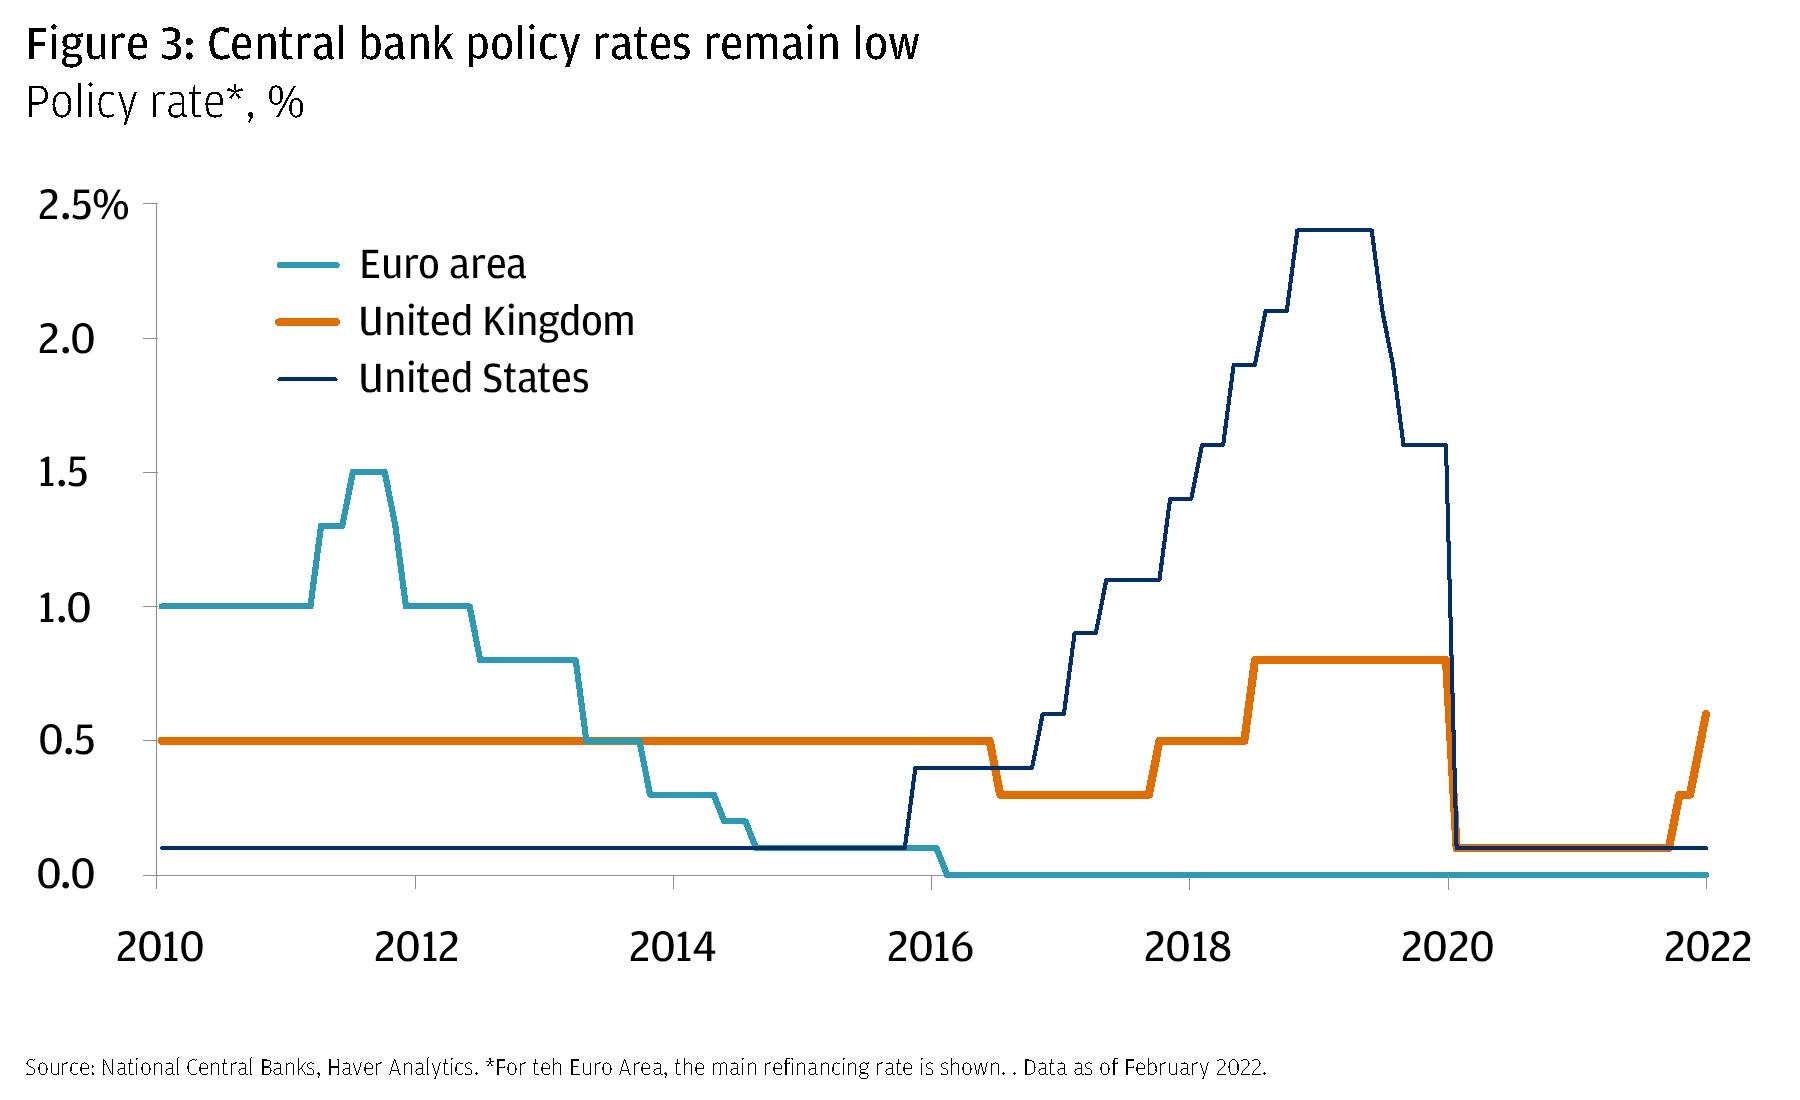 Central bank policy rates remain low. Depicted by a line chart showing policy rate (%) of US, Euro area, and the U.K. between 2010 and 2022.